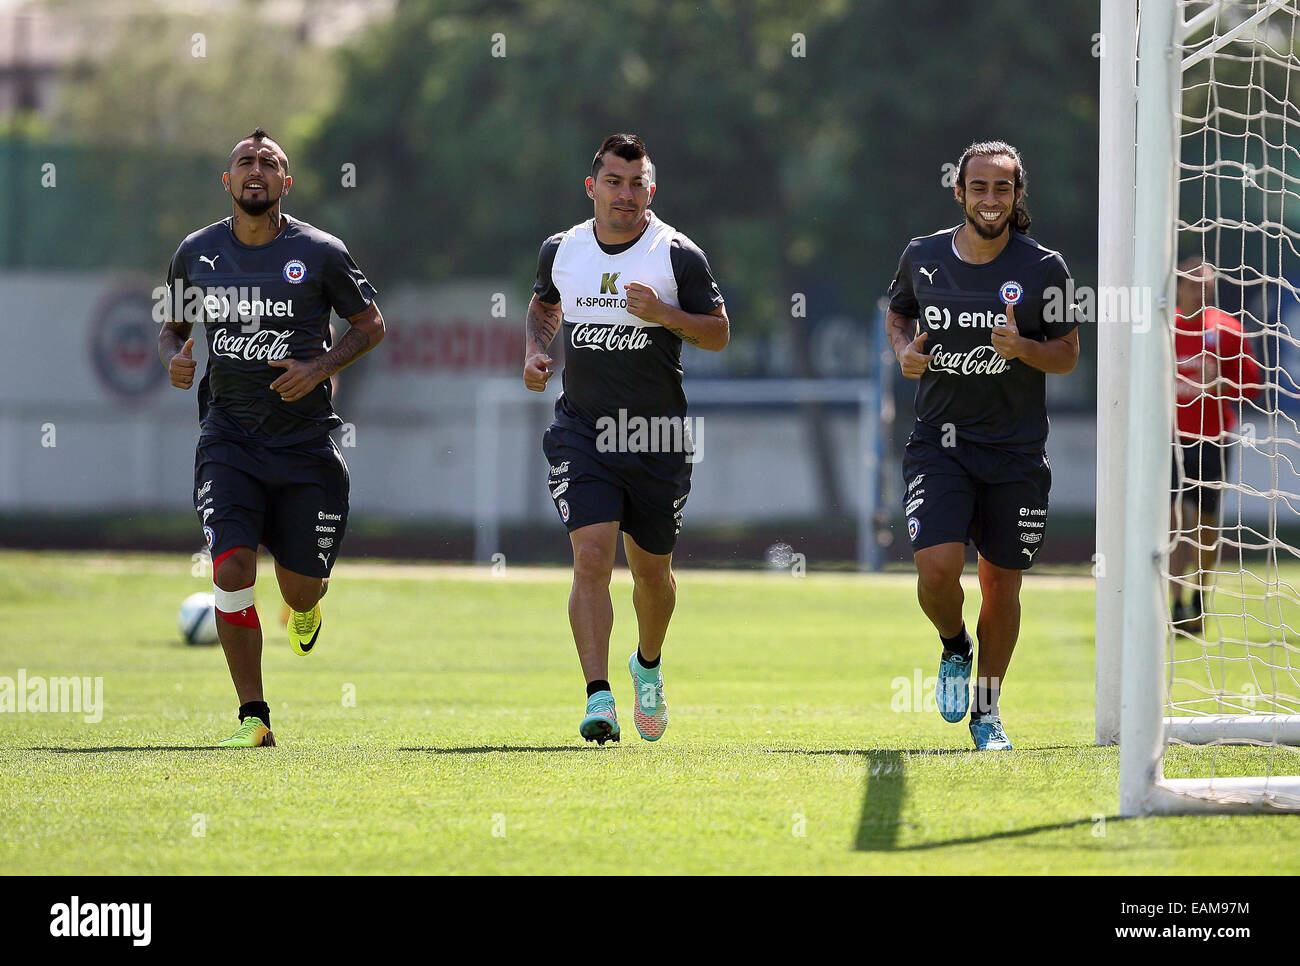 Santiago, Chile. 17th Nov, 2014. Image provided by the National Association of Professional Football of Chile, shows players Gary Medel (C), Jorge Valdivia (R) and Arturo Vidal of Chile's National Team attending a training session in Santiago, capital of Chile, on Nov. 17, 2014. The Chilean team will play a friendly match against Uruguay on Nov. 18. © ANFP/Xinhua/Alamy Live News Stock Photo